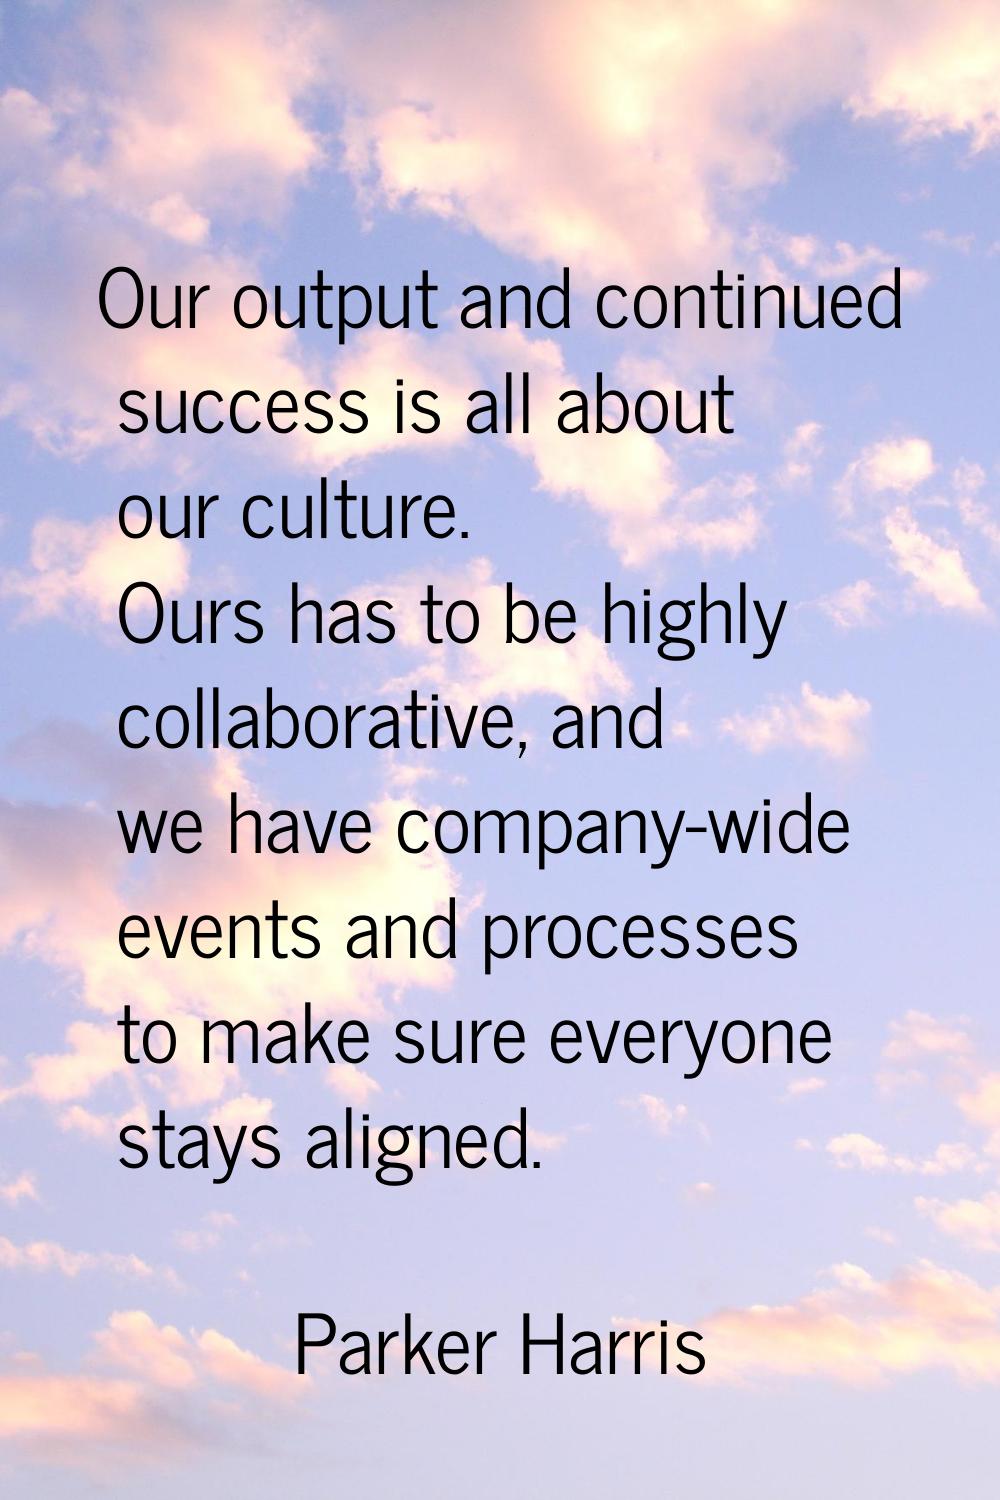 Our output and continued success is all about our culture. Ours has to be highly collaborative, and